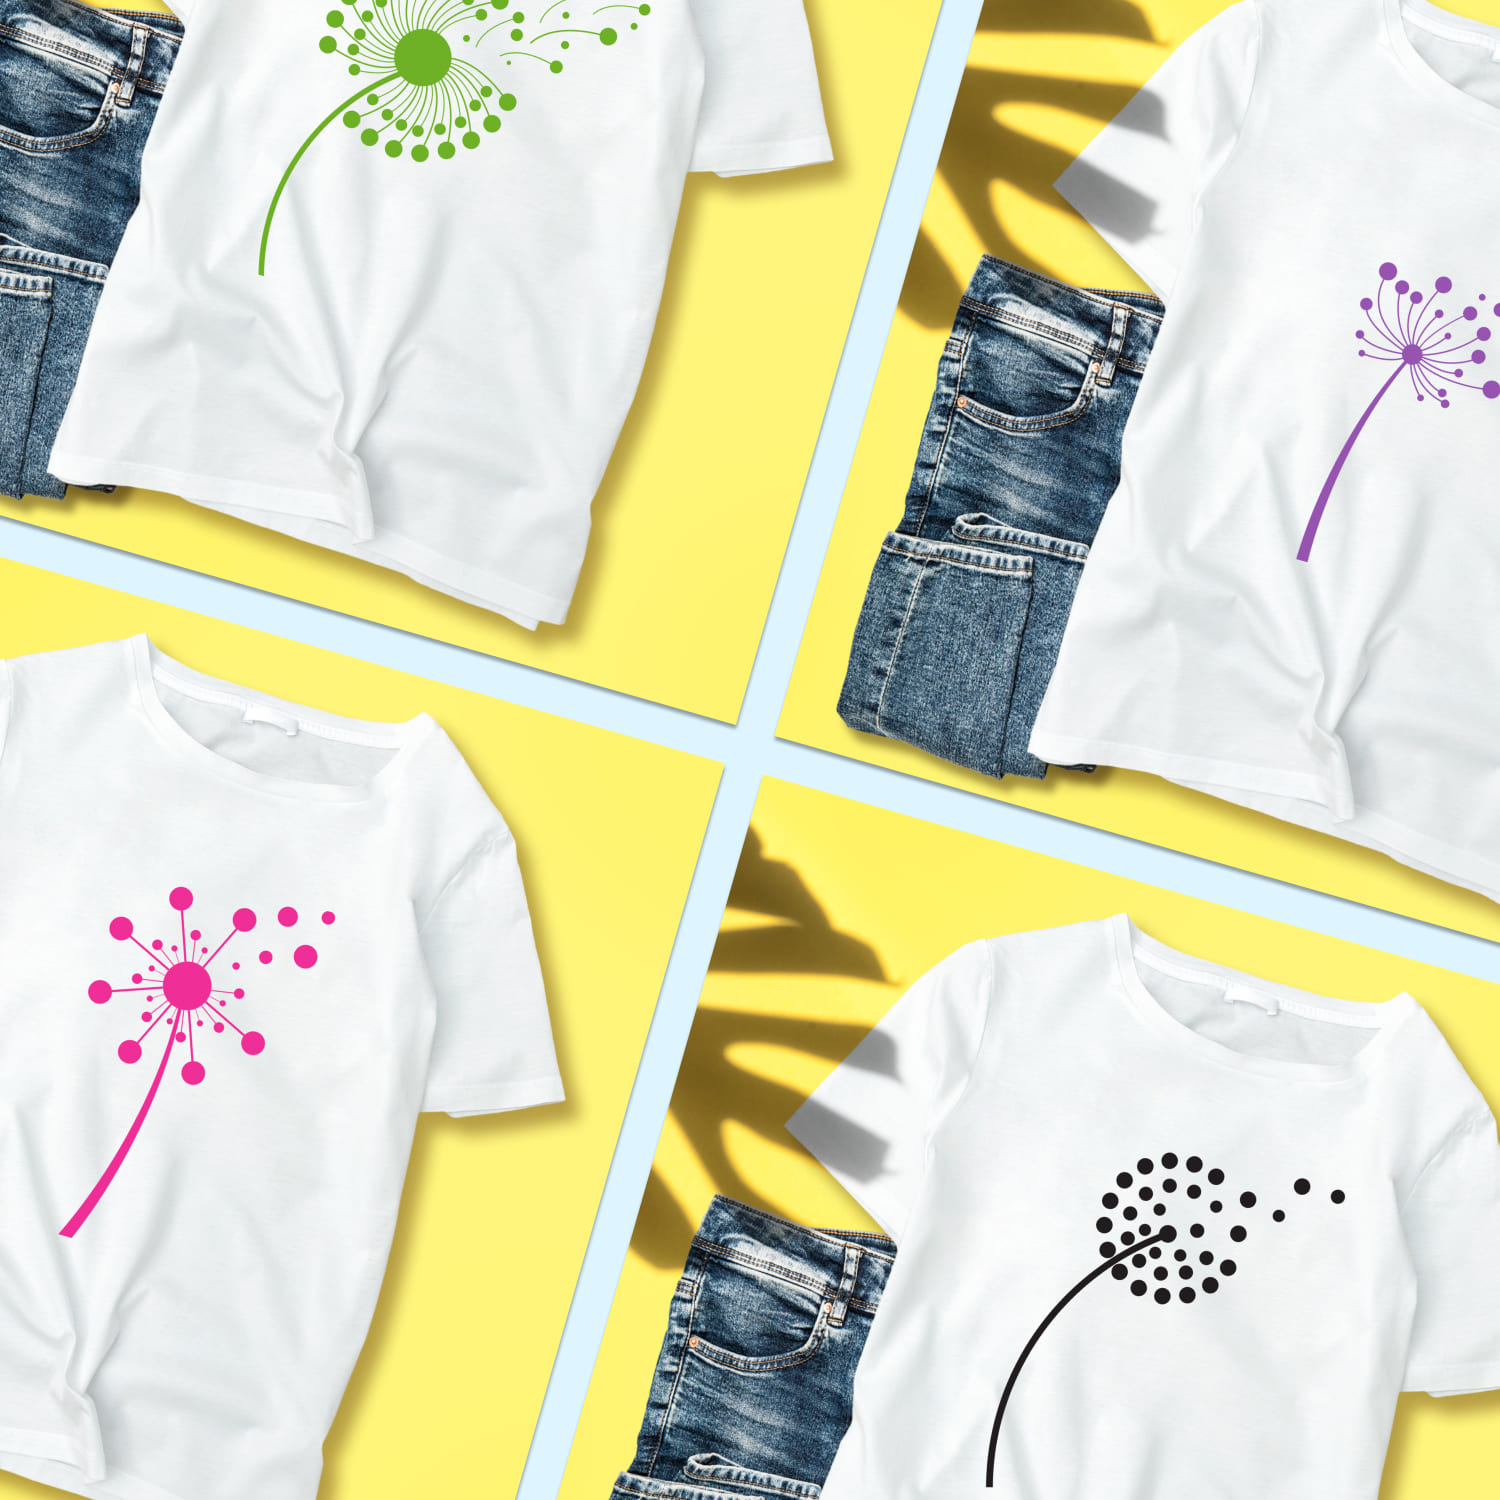 Collection of images of t-shirts with exquisite prints with dandelion.